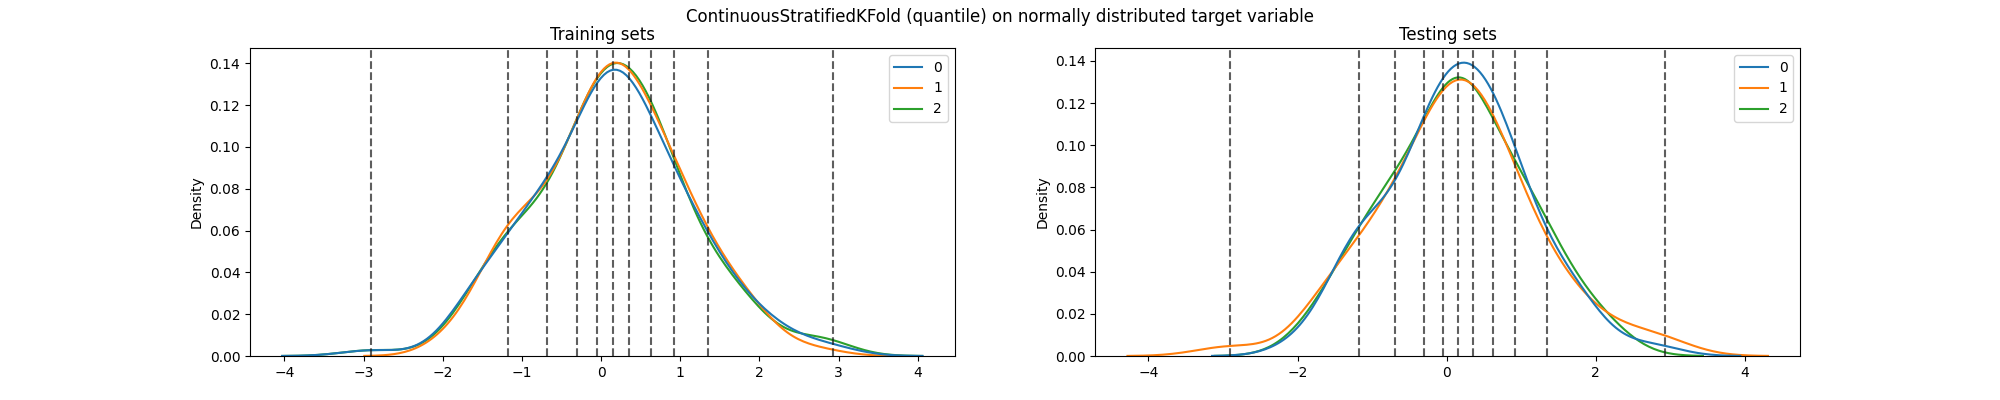 ContinuousStratifiedKFold (quantile) on normally distributed target variable, Training sets, Testing sets